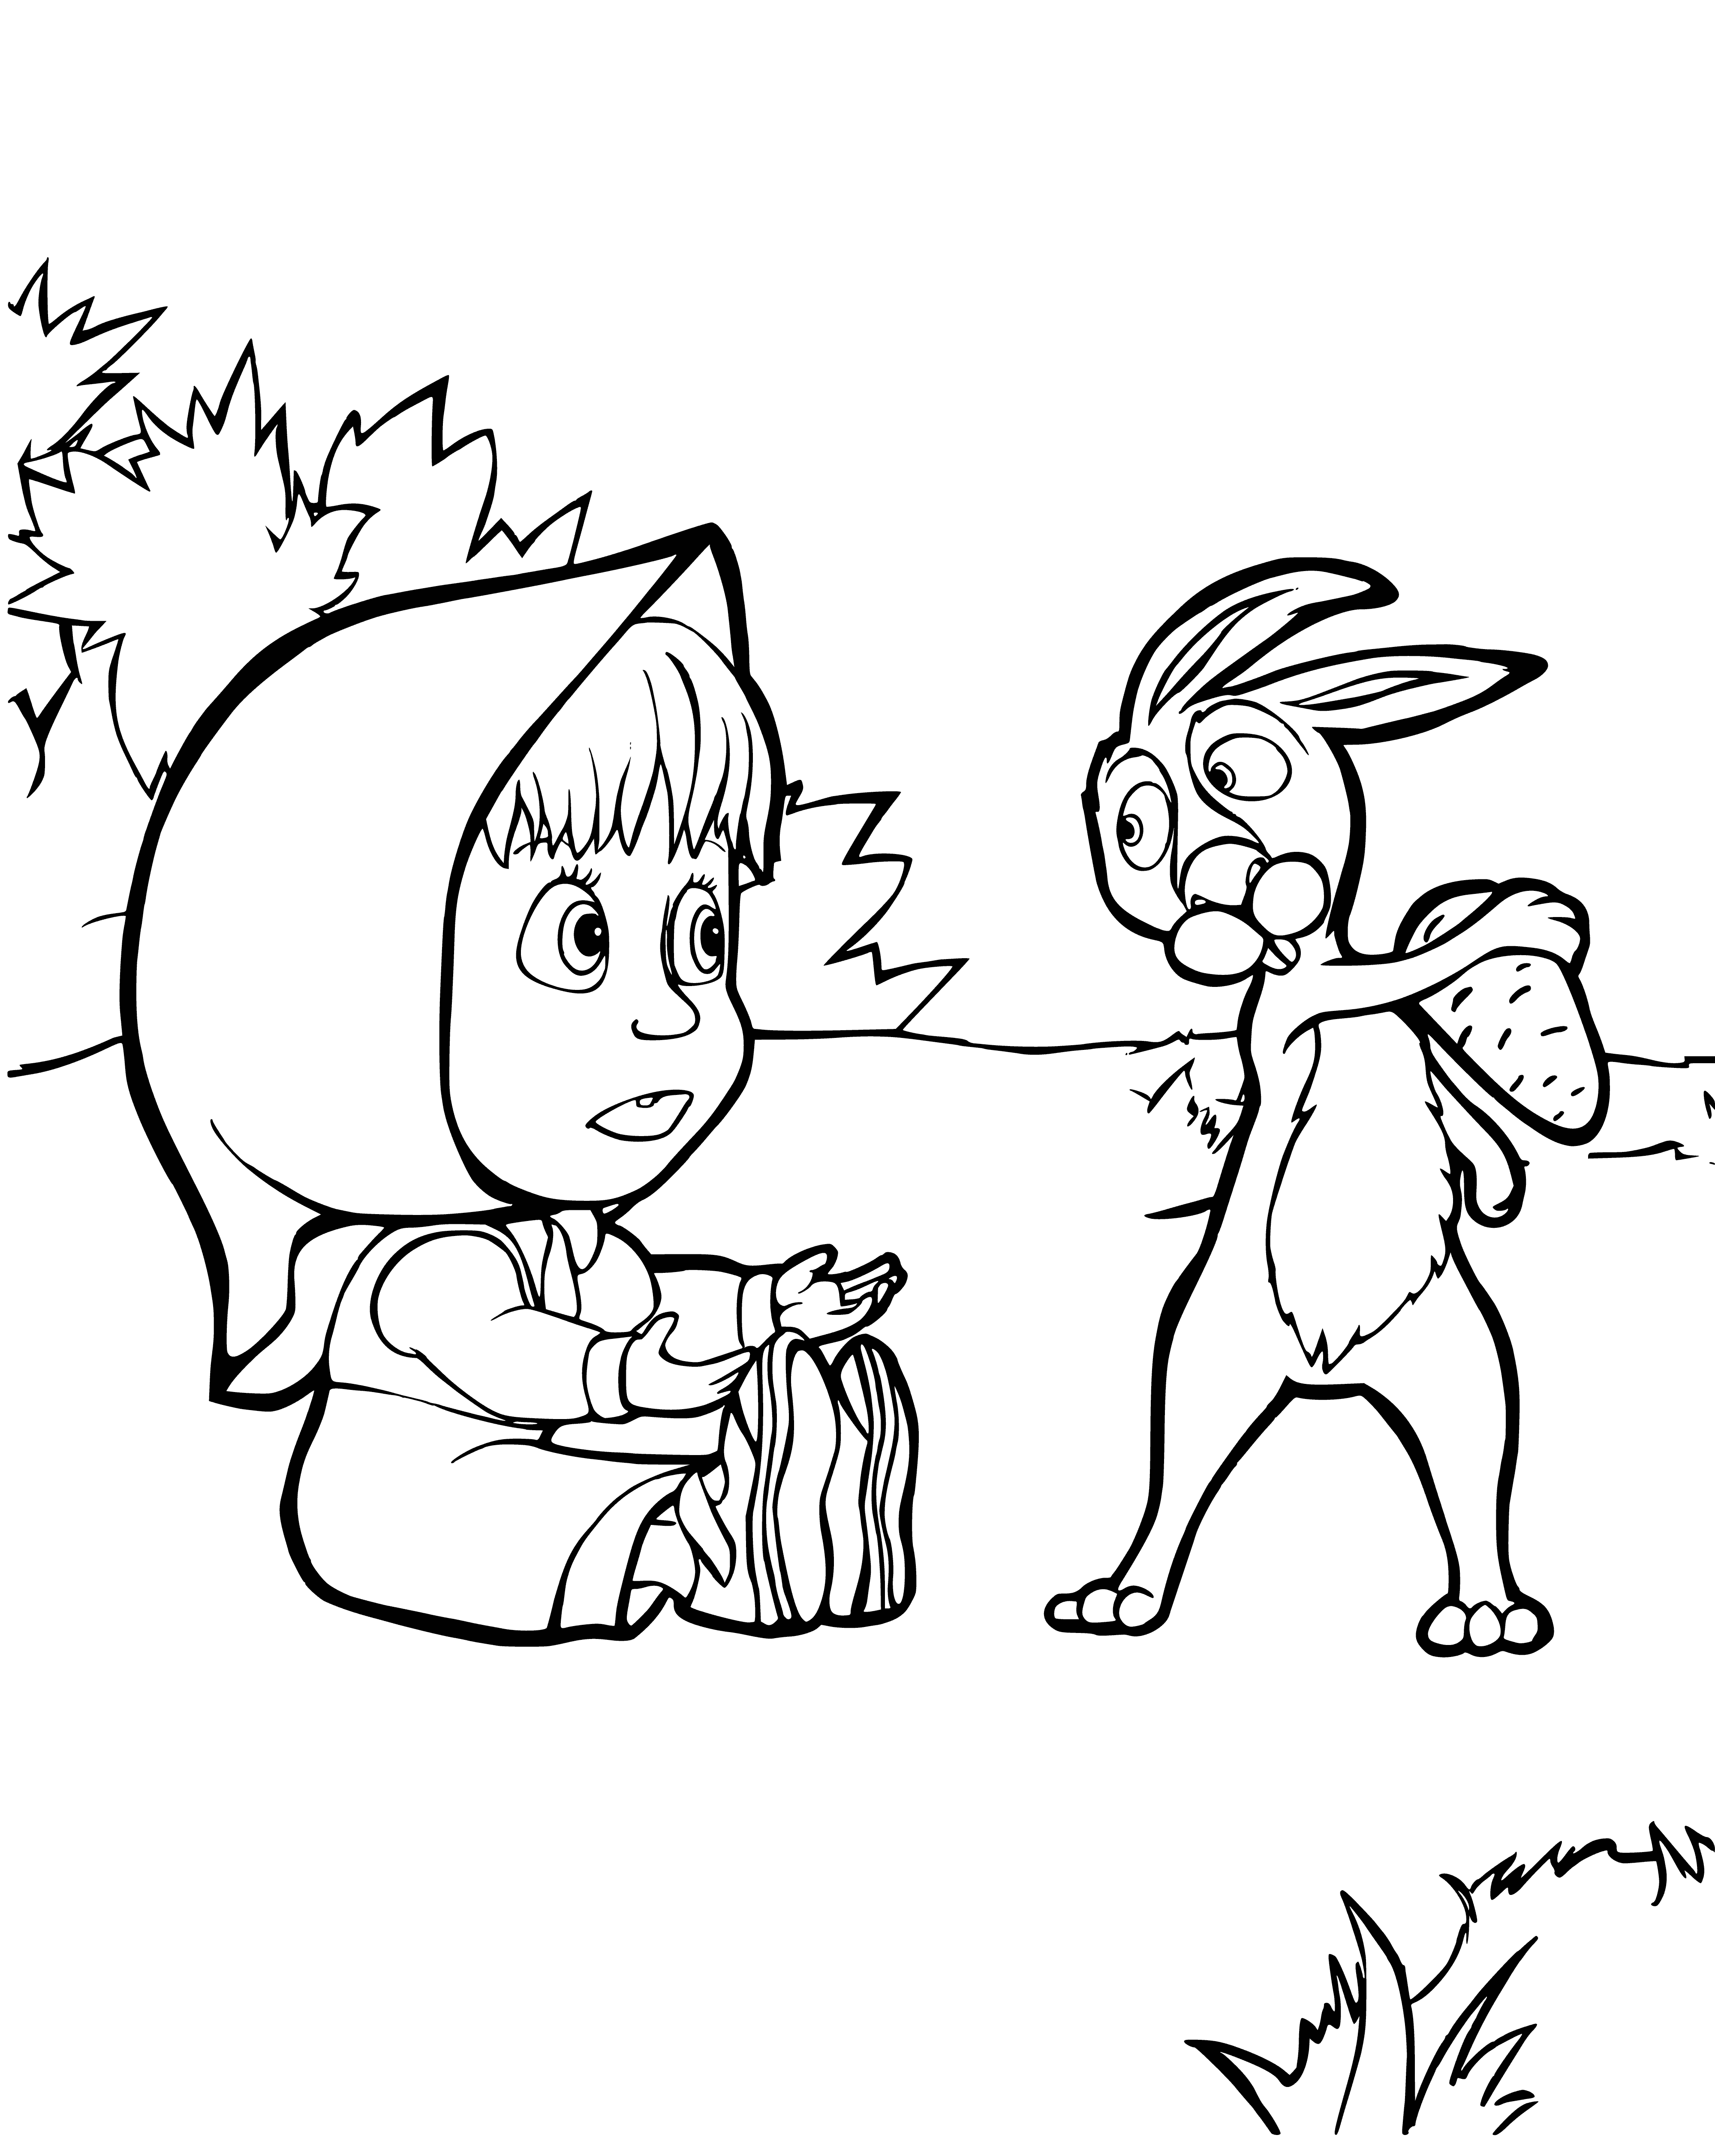 coloring page: Masha, small and blonde, wearing a red scarf and blue jacket, meets a Hare in the forest.